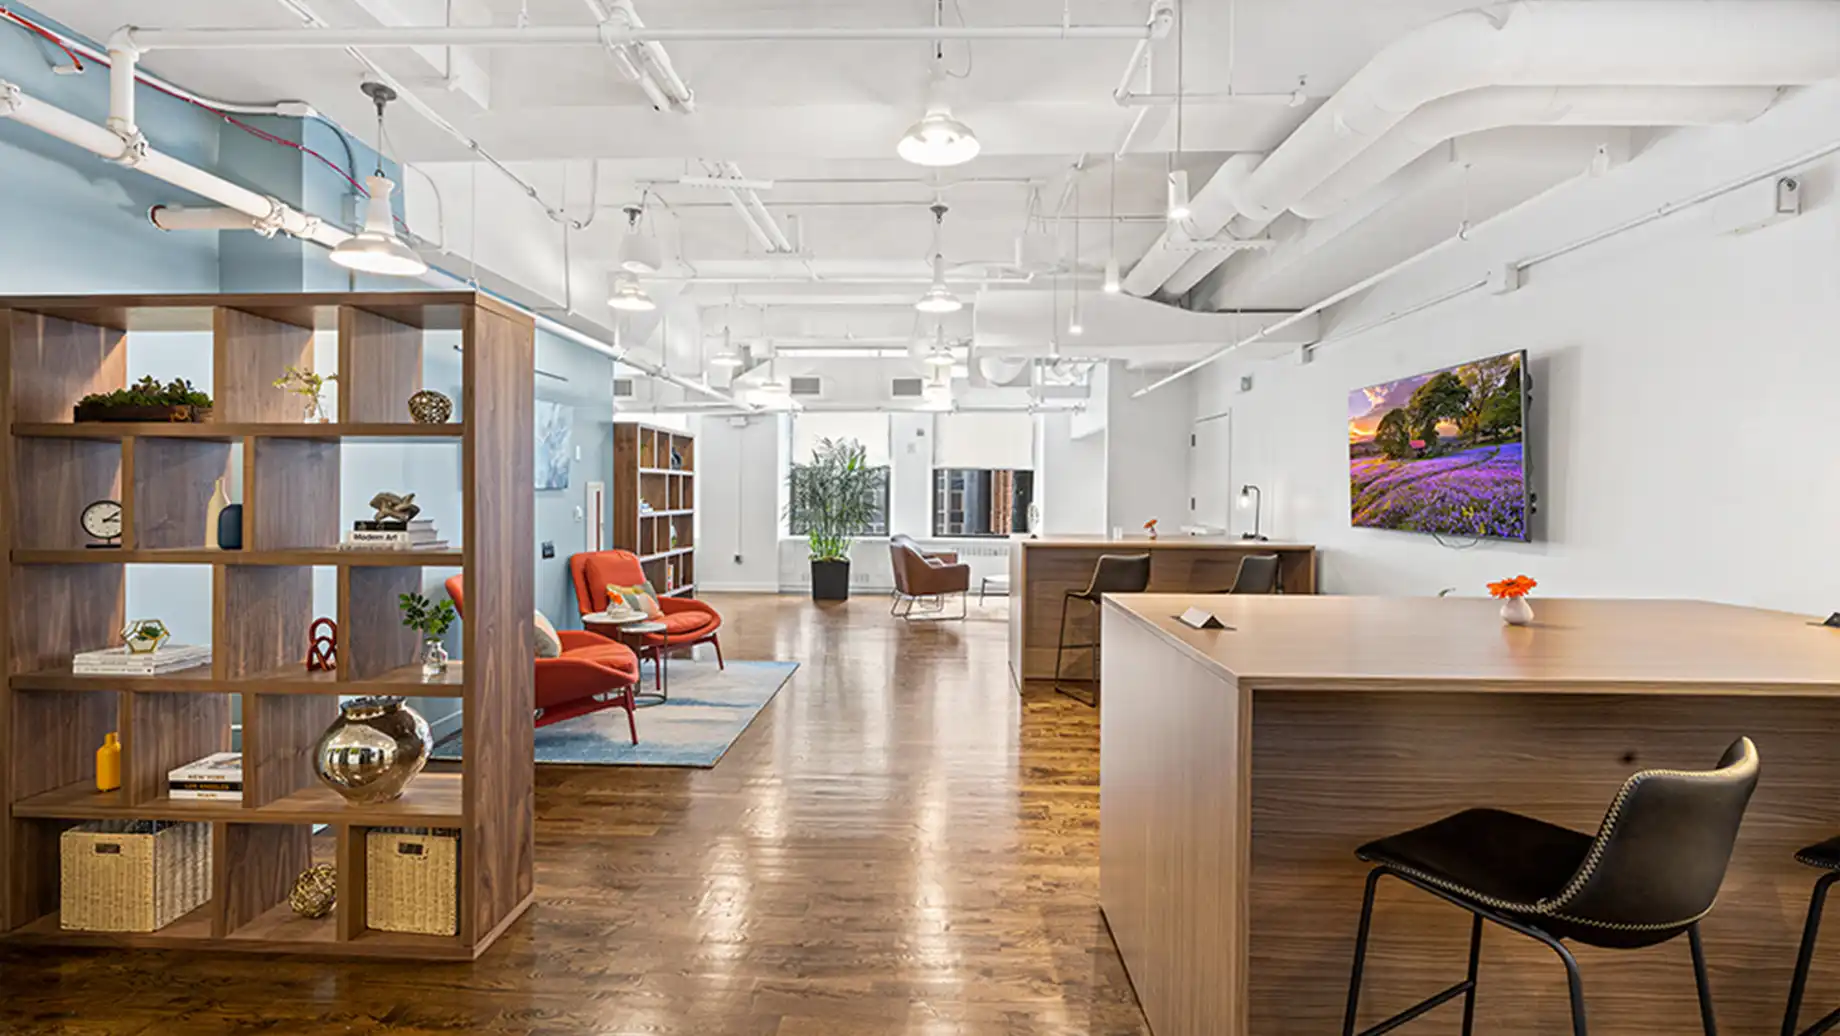 NYC Grand Central Private Office Space & Coworking Spaces